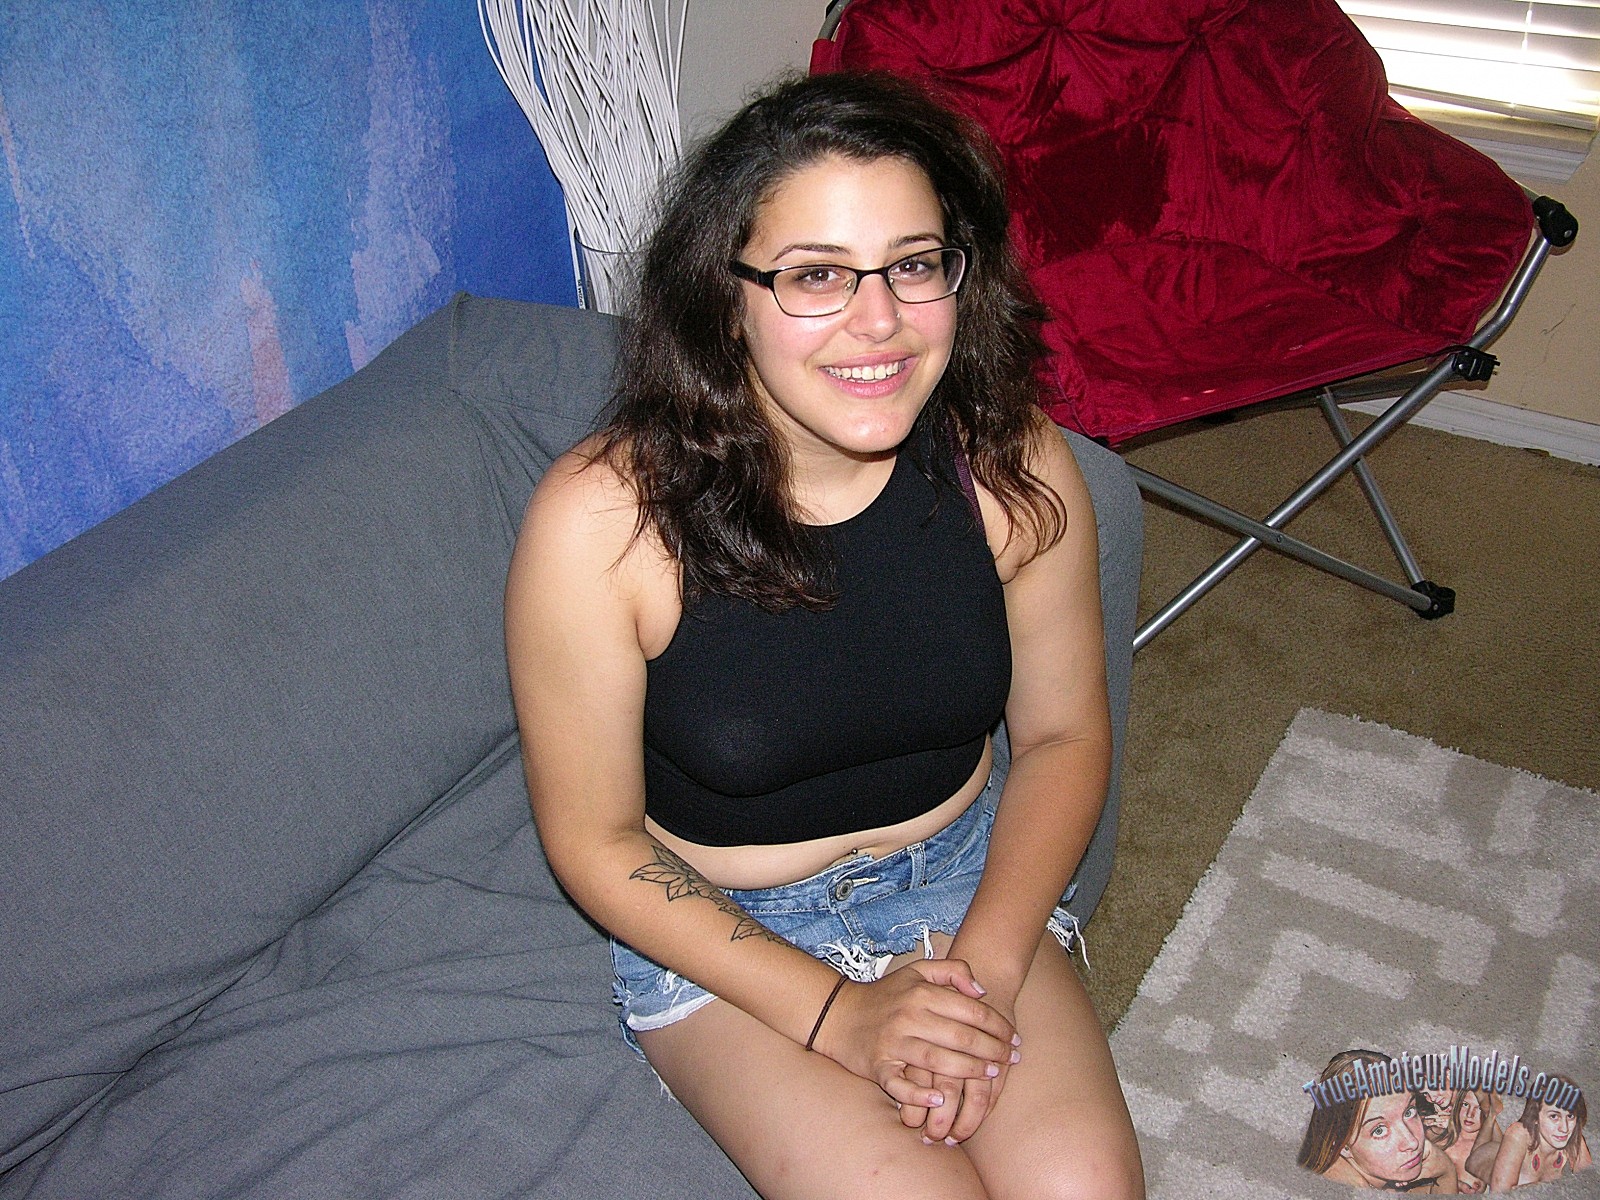 amateur-girl-nude-with-glasses1-1